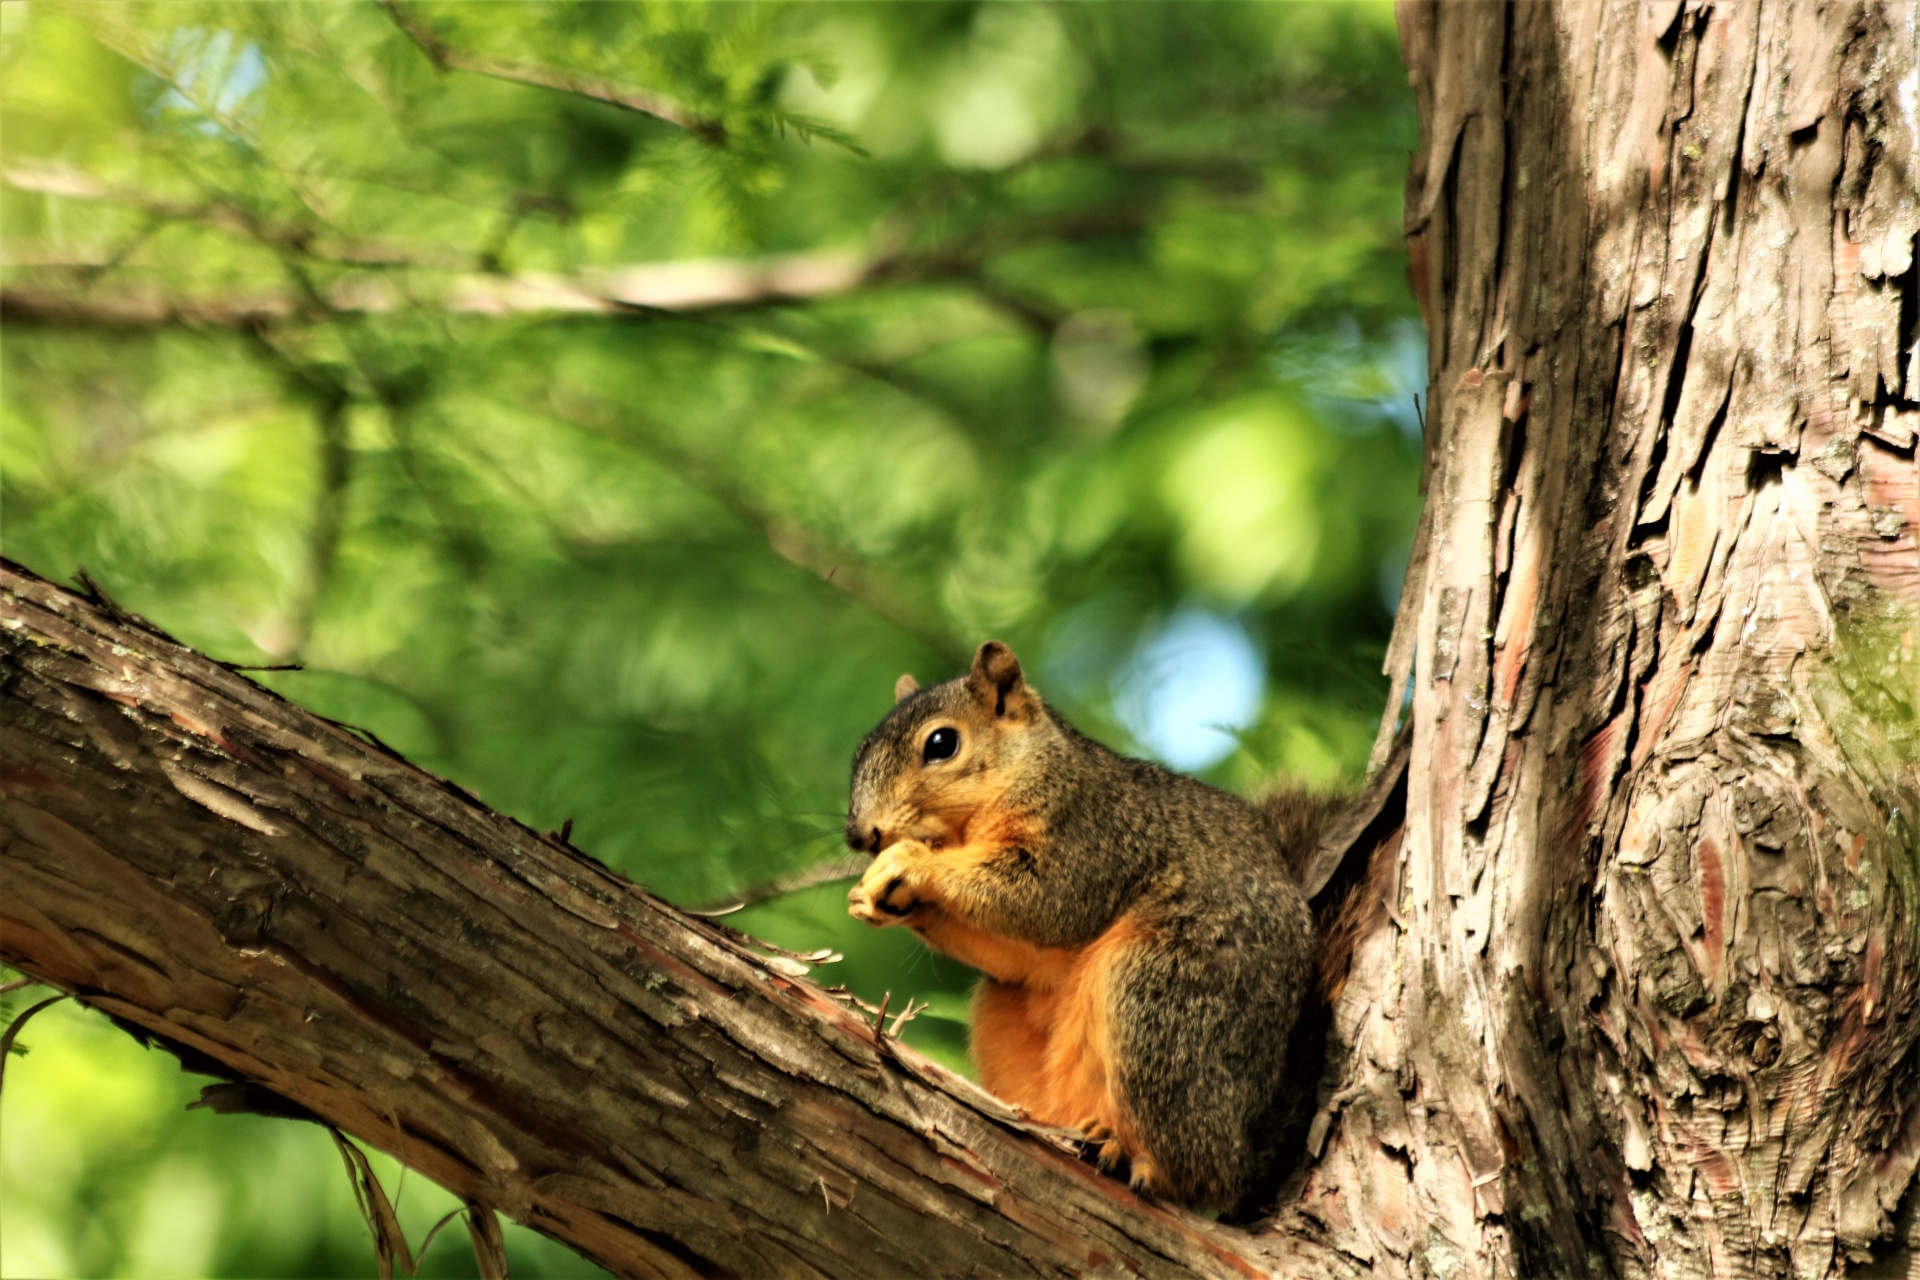 A cute little fox squirrel is sitting on a tree branch eating.